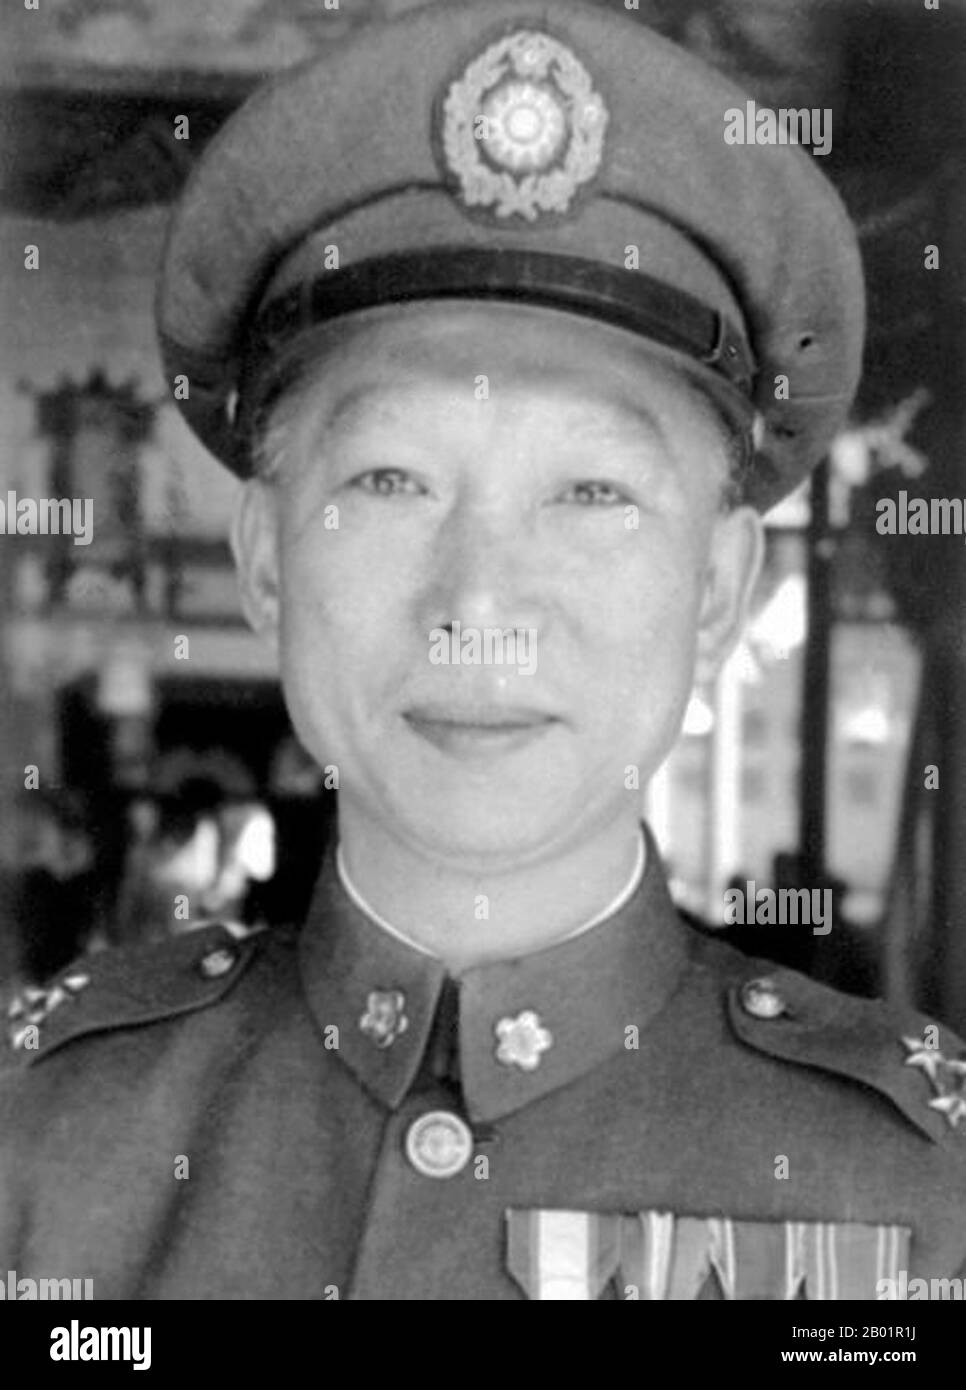 Taiwan/China: Xu Yue (26 December 1896 - 3 May 1998), Chinese Nationalist general, c. 1940s.  Xue Yue was a Chinese Nationalist military general, nicknamed by Claire Lee Chennault of the Flying Tigers as the 'Patton of Asia'.  When Chiang Kai-shek retreated to Taiwan in 1949, Xue was put in charge of defending Hainan Island. The victorious Red Army was too much for the demoralised Nationalist forces. Xue left for Taiwan after the defense of Hainan Island collapsed. He served as a nominal adviser to the chief of staff in name only. He lived until 1998 to the age of 101. Stock Photo